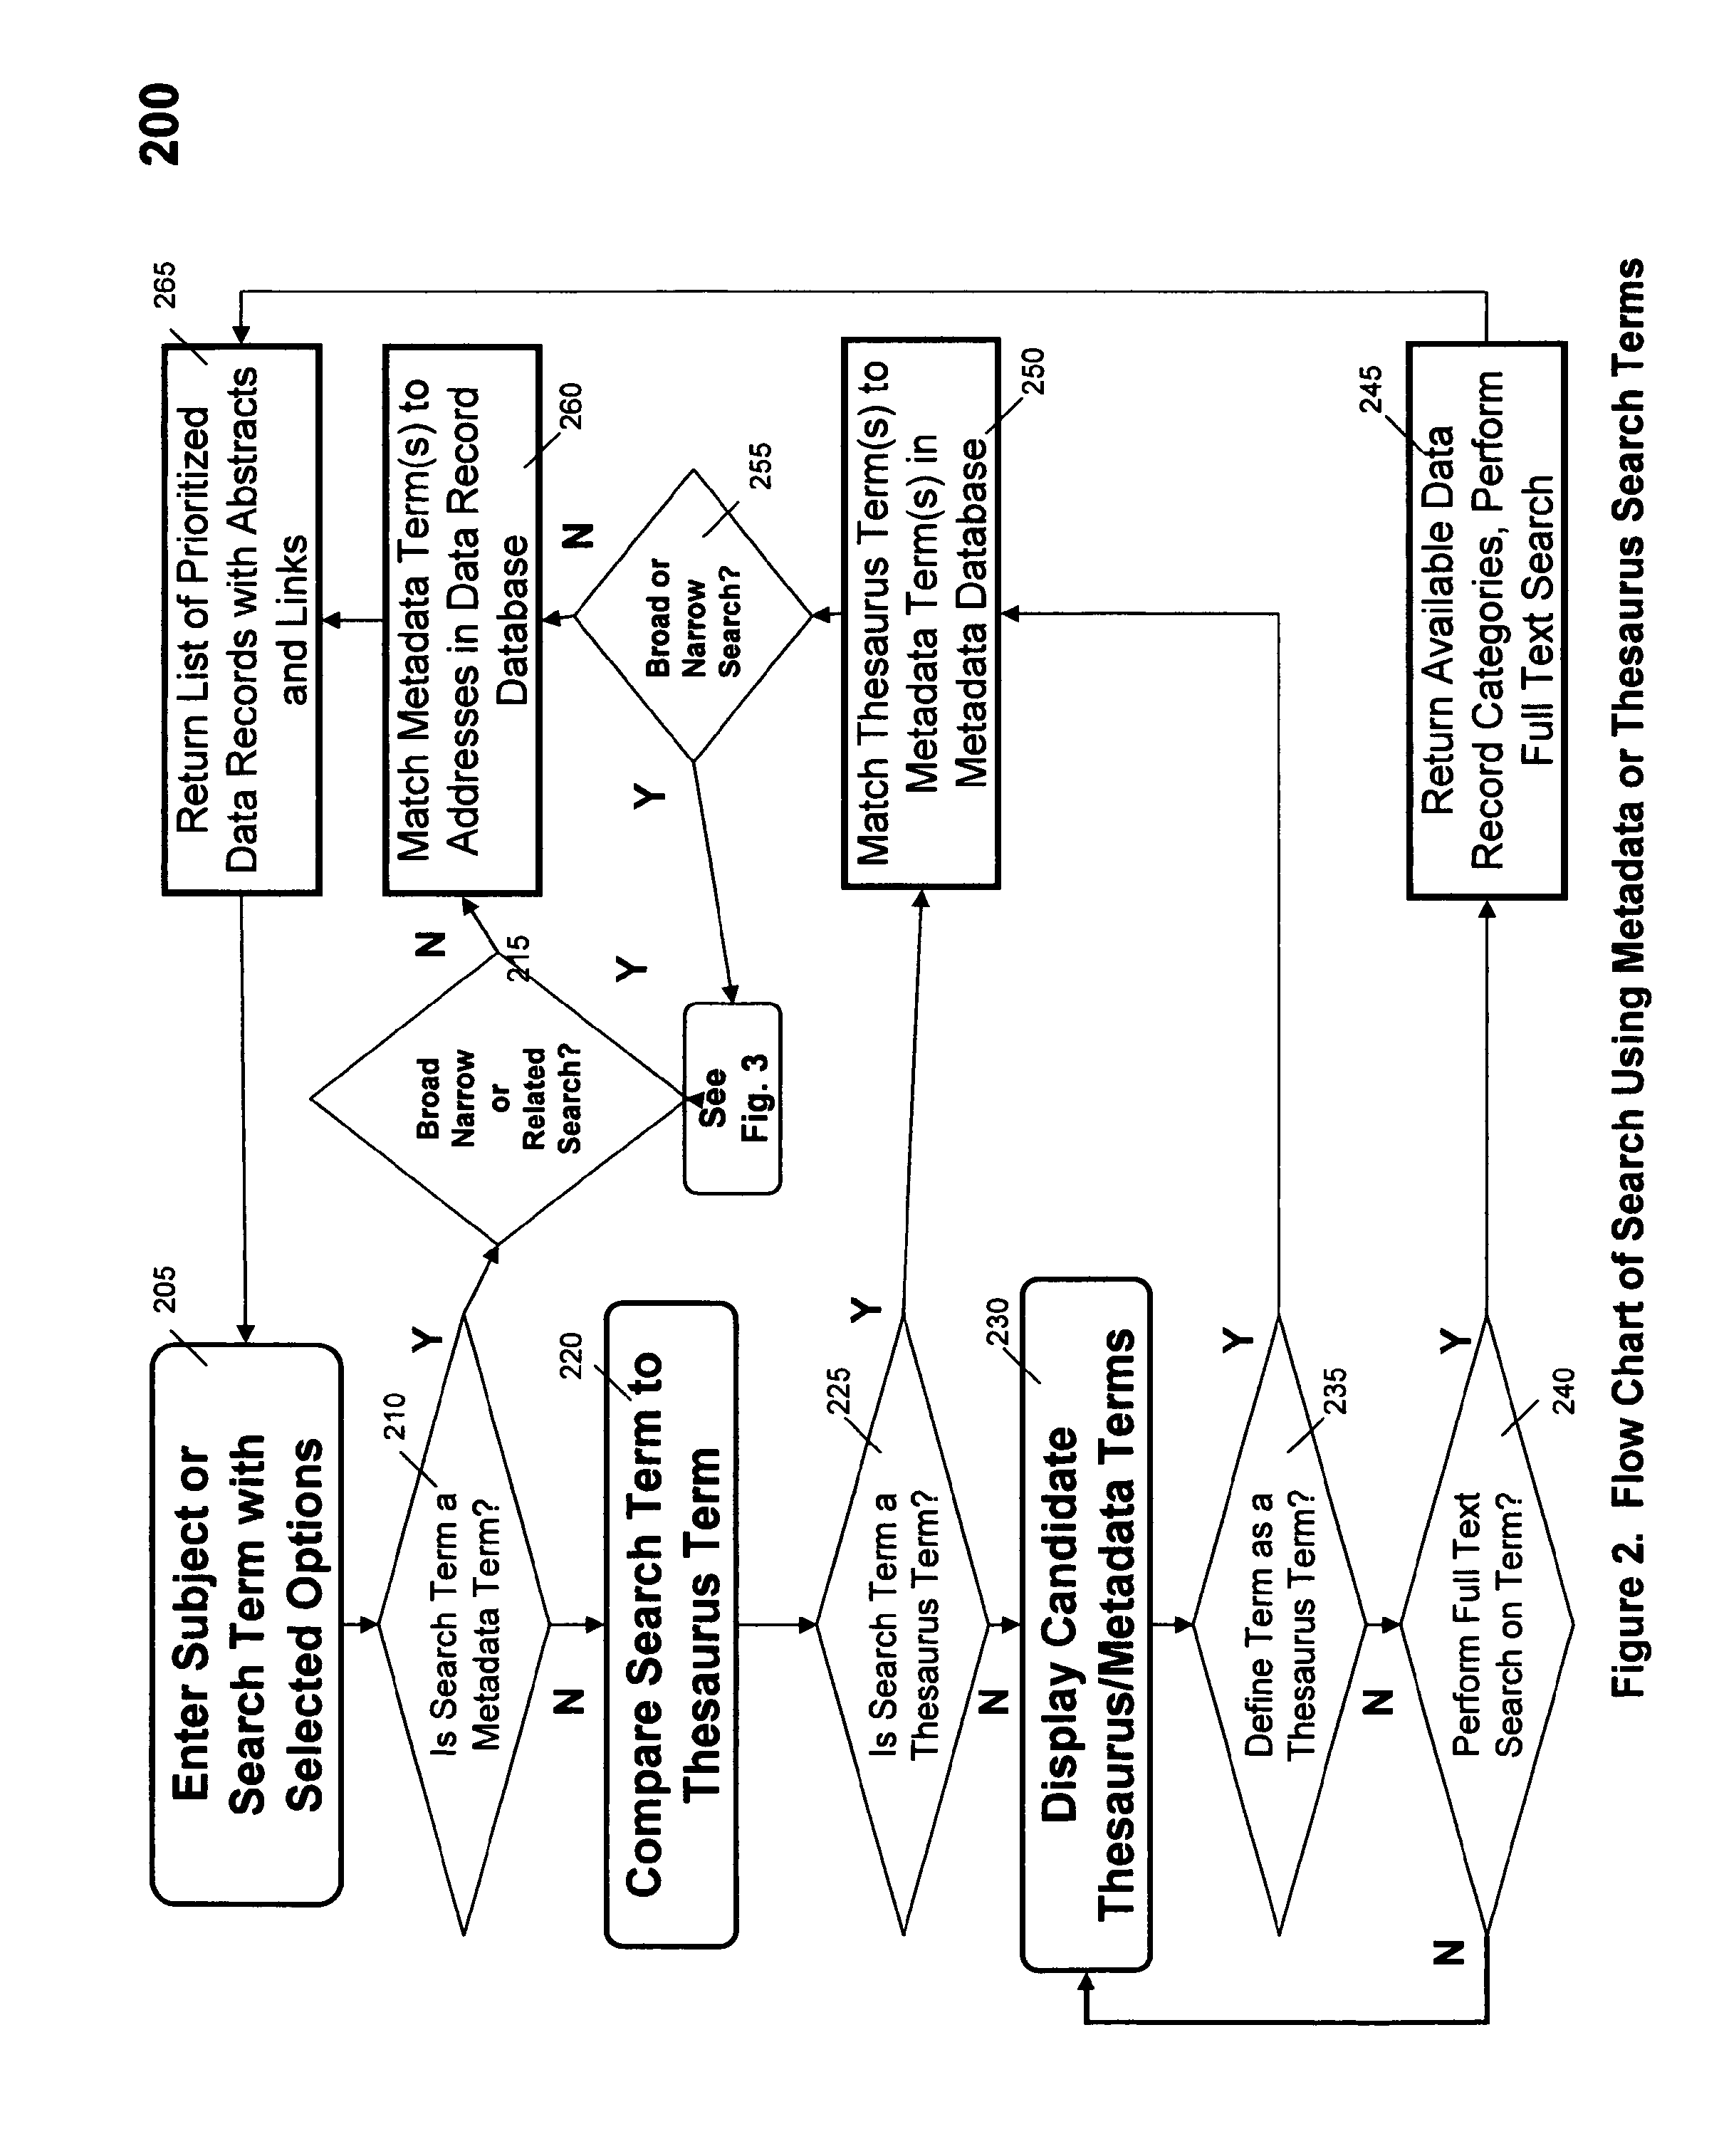 System and method for indexing, organizing, storing and retrieving environmental information